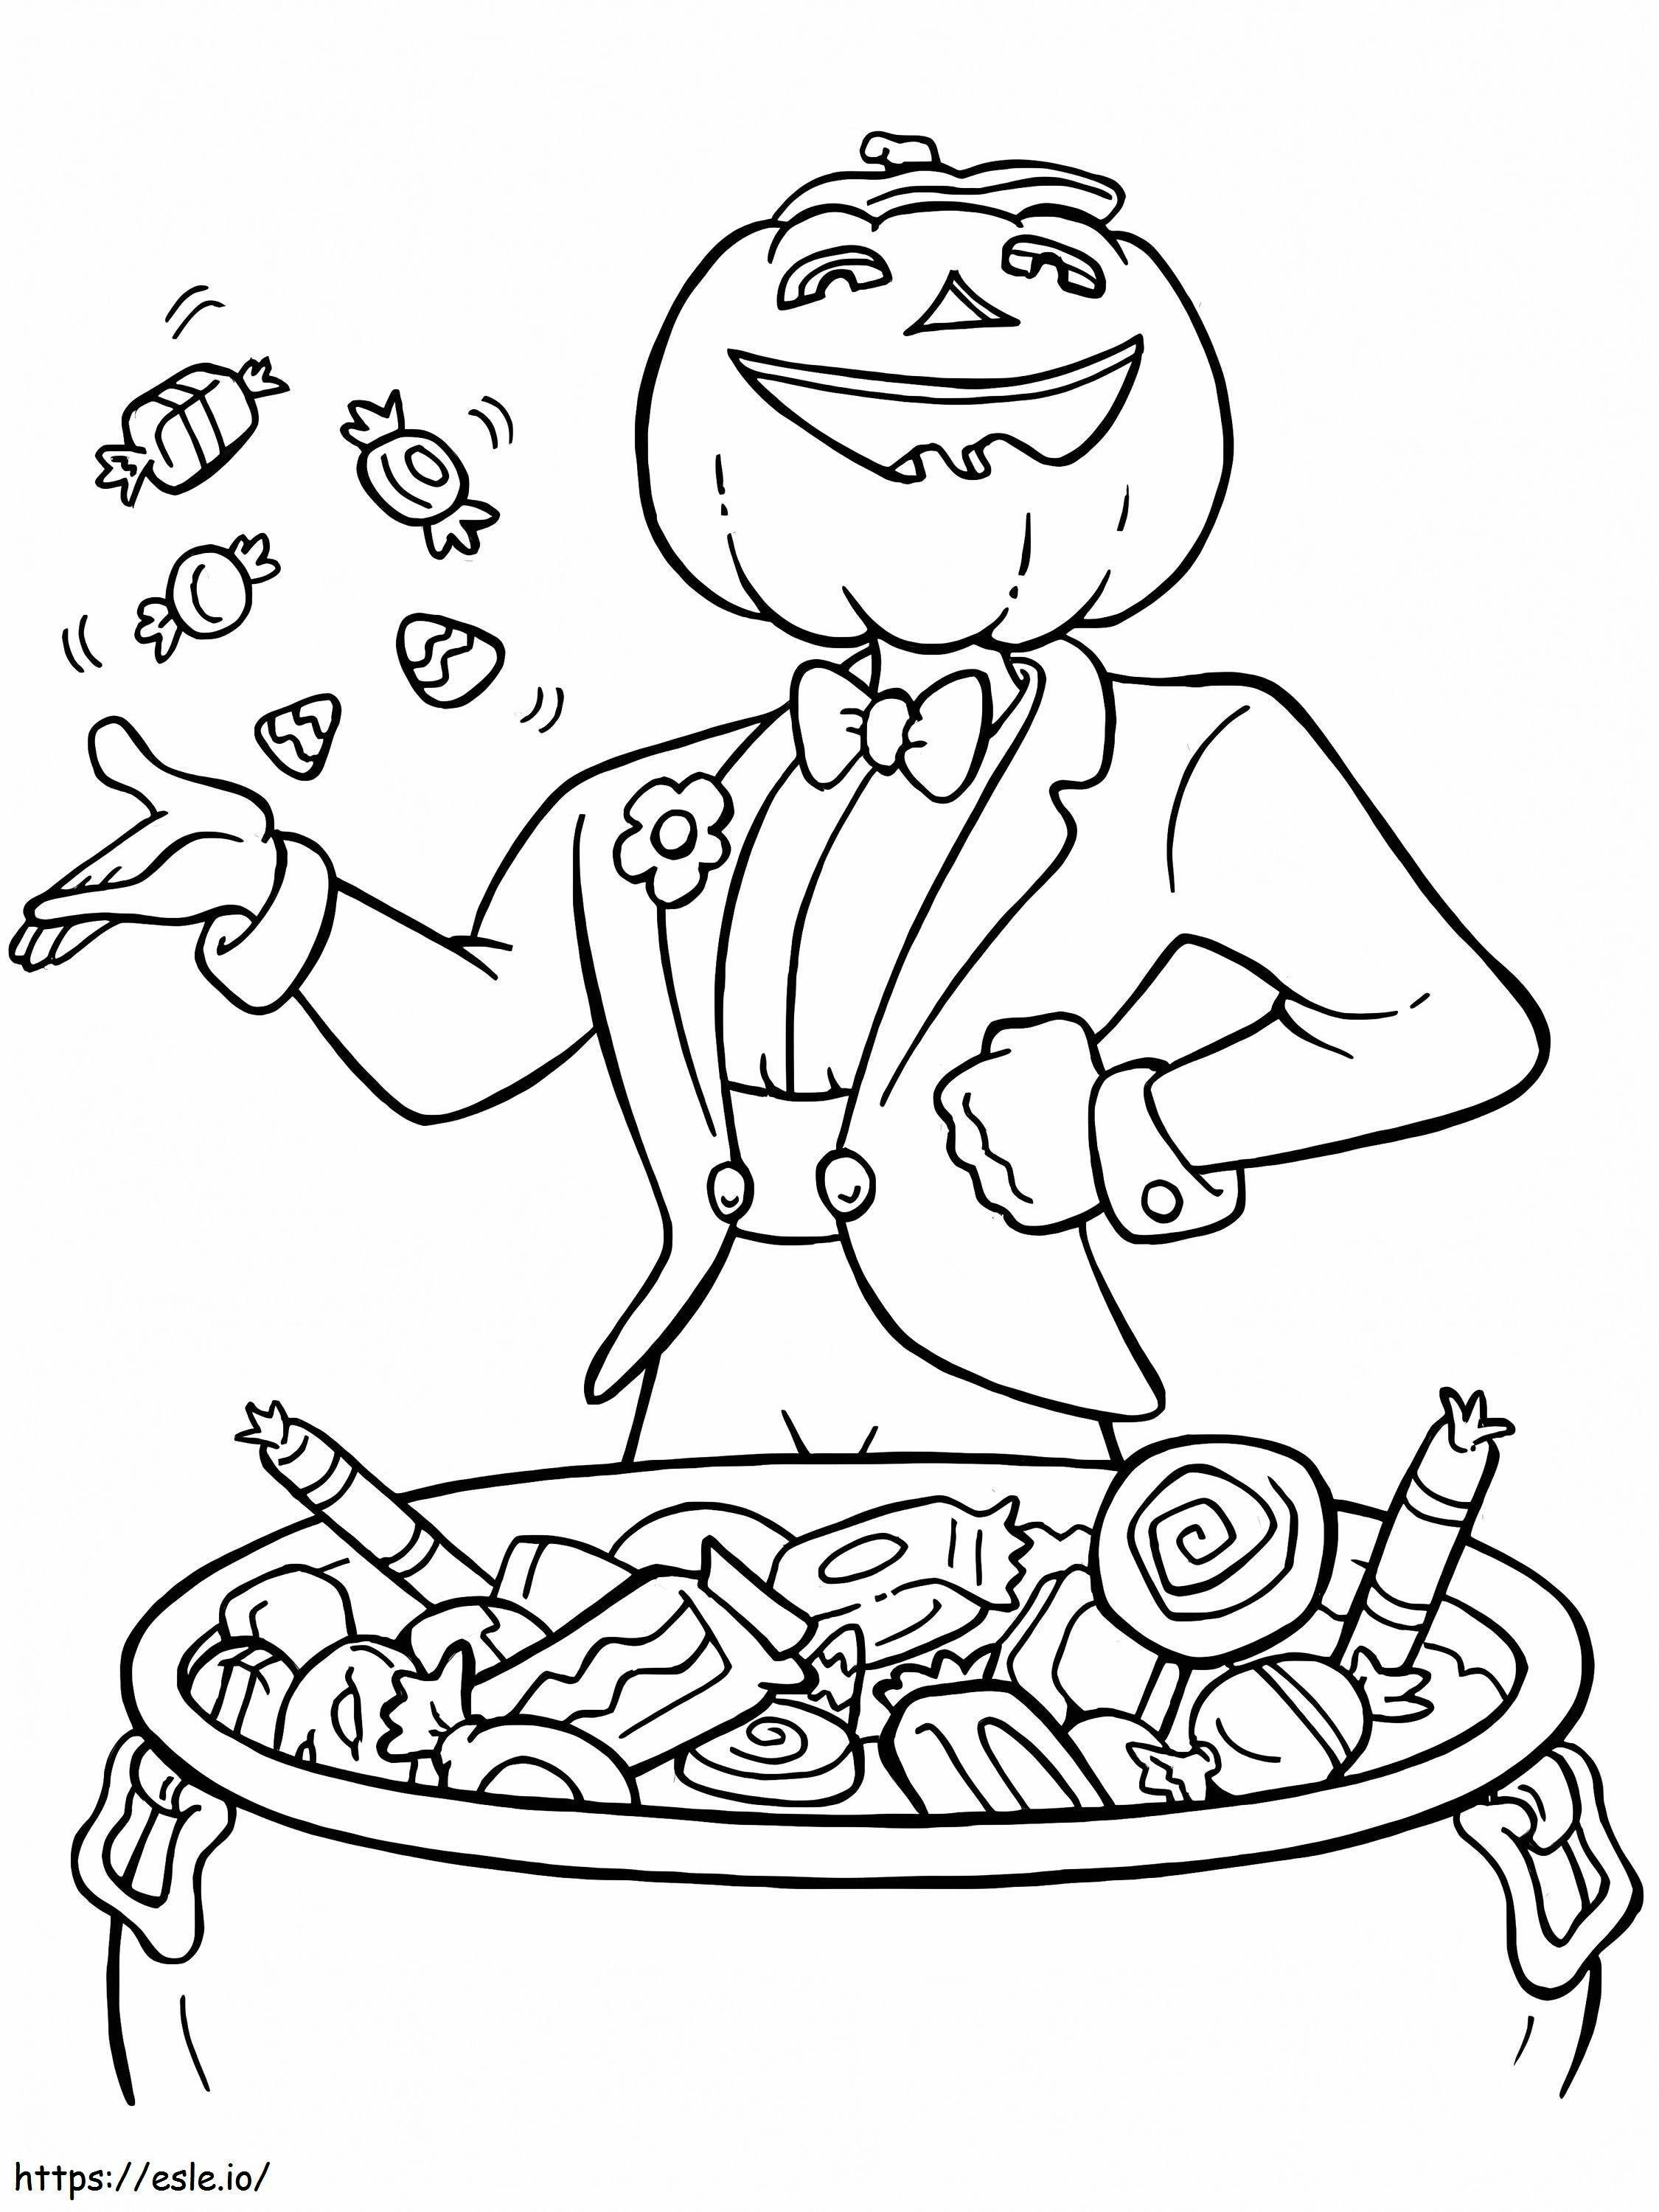 Pumpkin Head With Candies coloring page